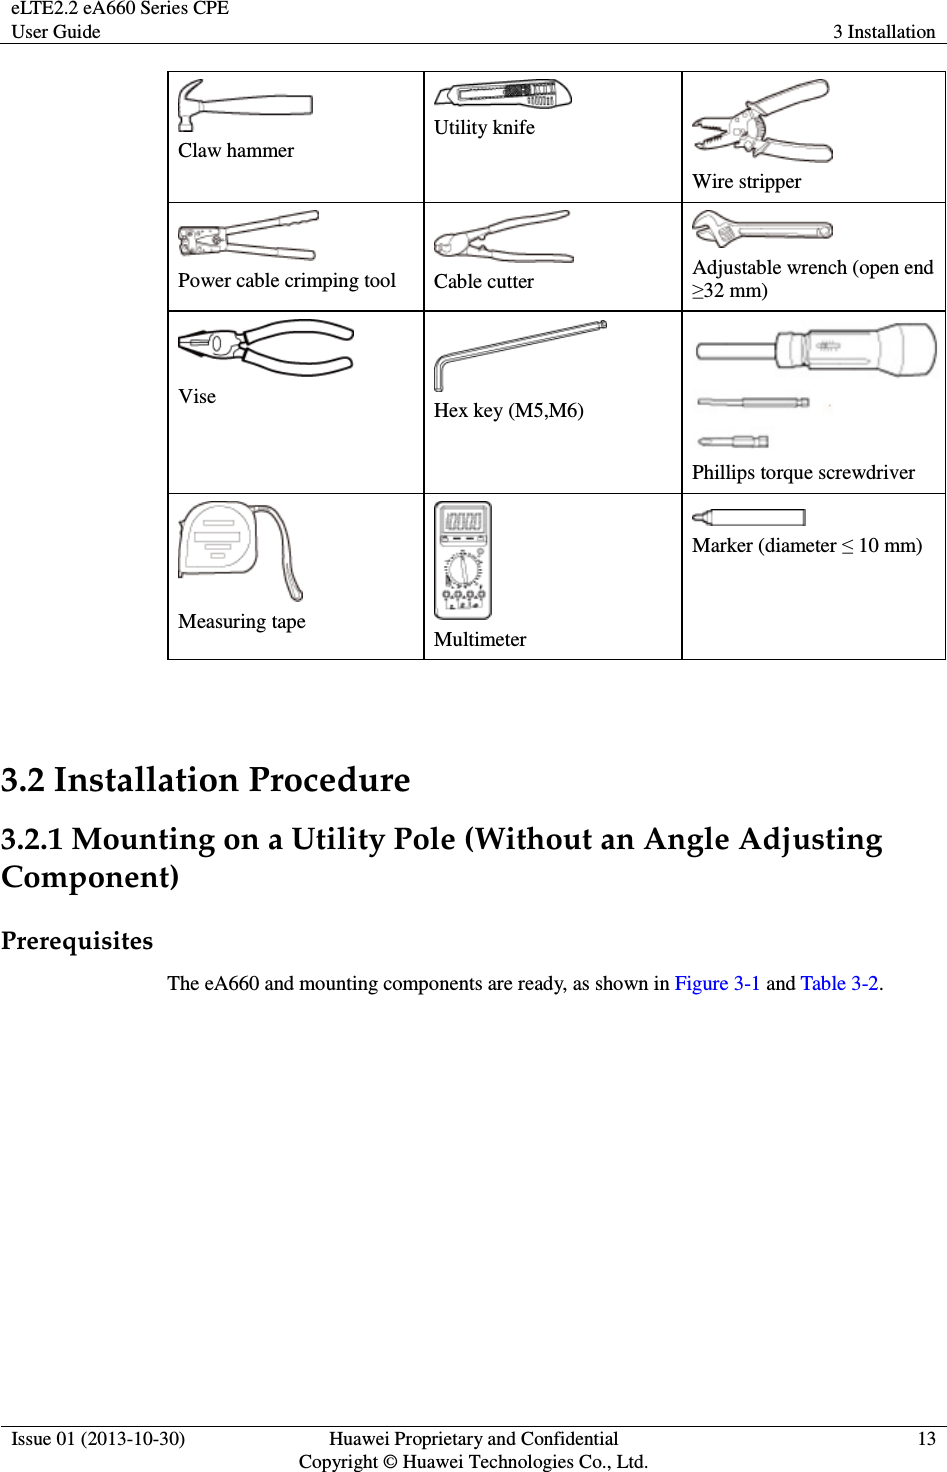 eLTE2.2 eA660 Series CPE User Guide  3 Installation  Issue 01 (2013-10-30)  Huawei Proprietary and Confidential                                     Copyright © Huawei Technologies Co., Ltd. 13   Claw hammer  Utility knife  Wire stripper  Power cable crimping tool  Cable cutter  Adjustable wrench (open end ≥32 mm)  Vise   Hex key (M5,M6)  Phillips torque screwdriver  Measuring tape   Multimeter  Marker (diameter ≤ 10 mm)  3.2 Installation Procedure 3.2.1 Mounting on a Utility Pole (Without an Angle Adjusting Component) Prerequisites The eA660 and mounting components are ready, as shown in Figure 3-1 and Table 3-2. 